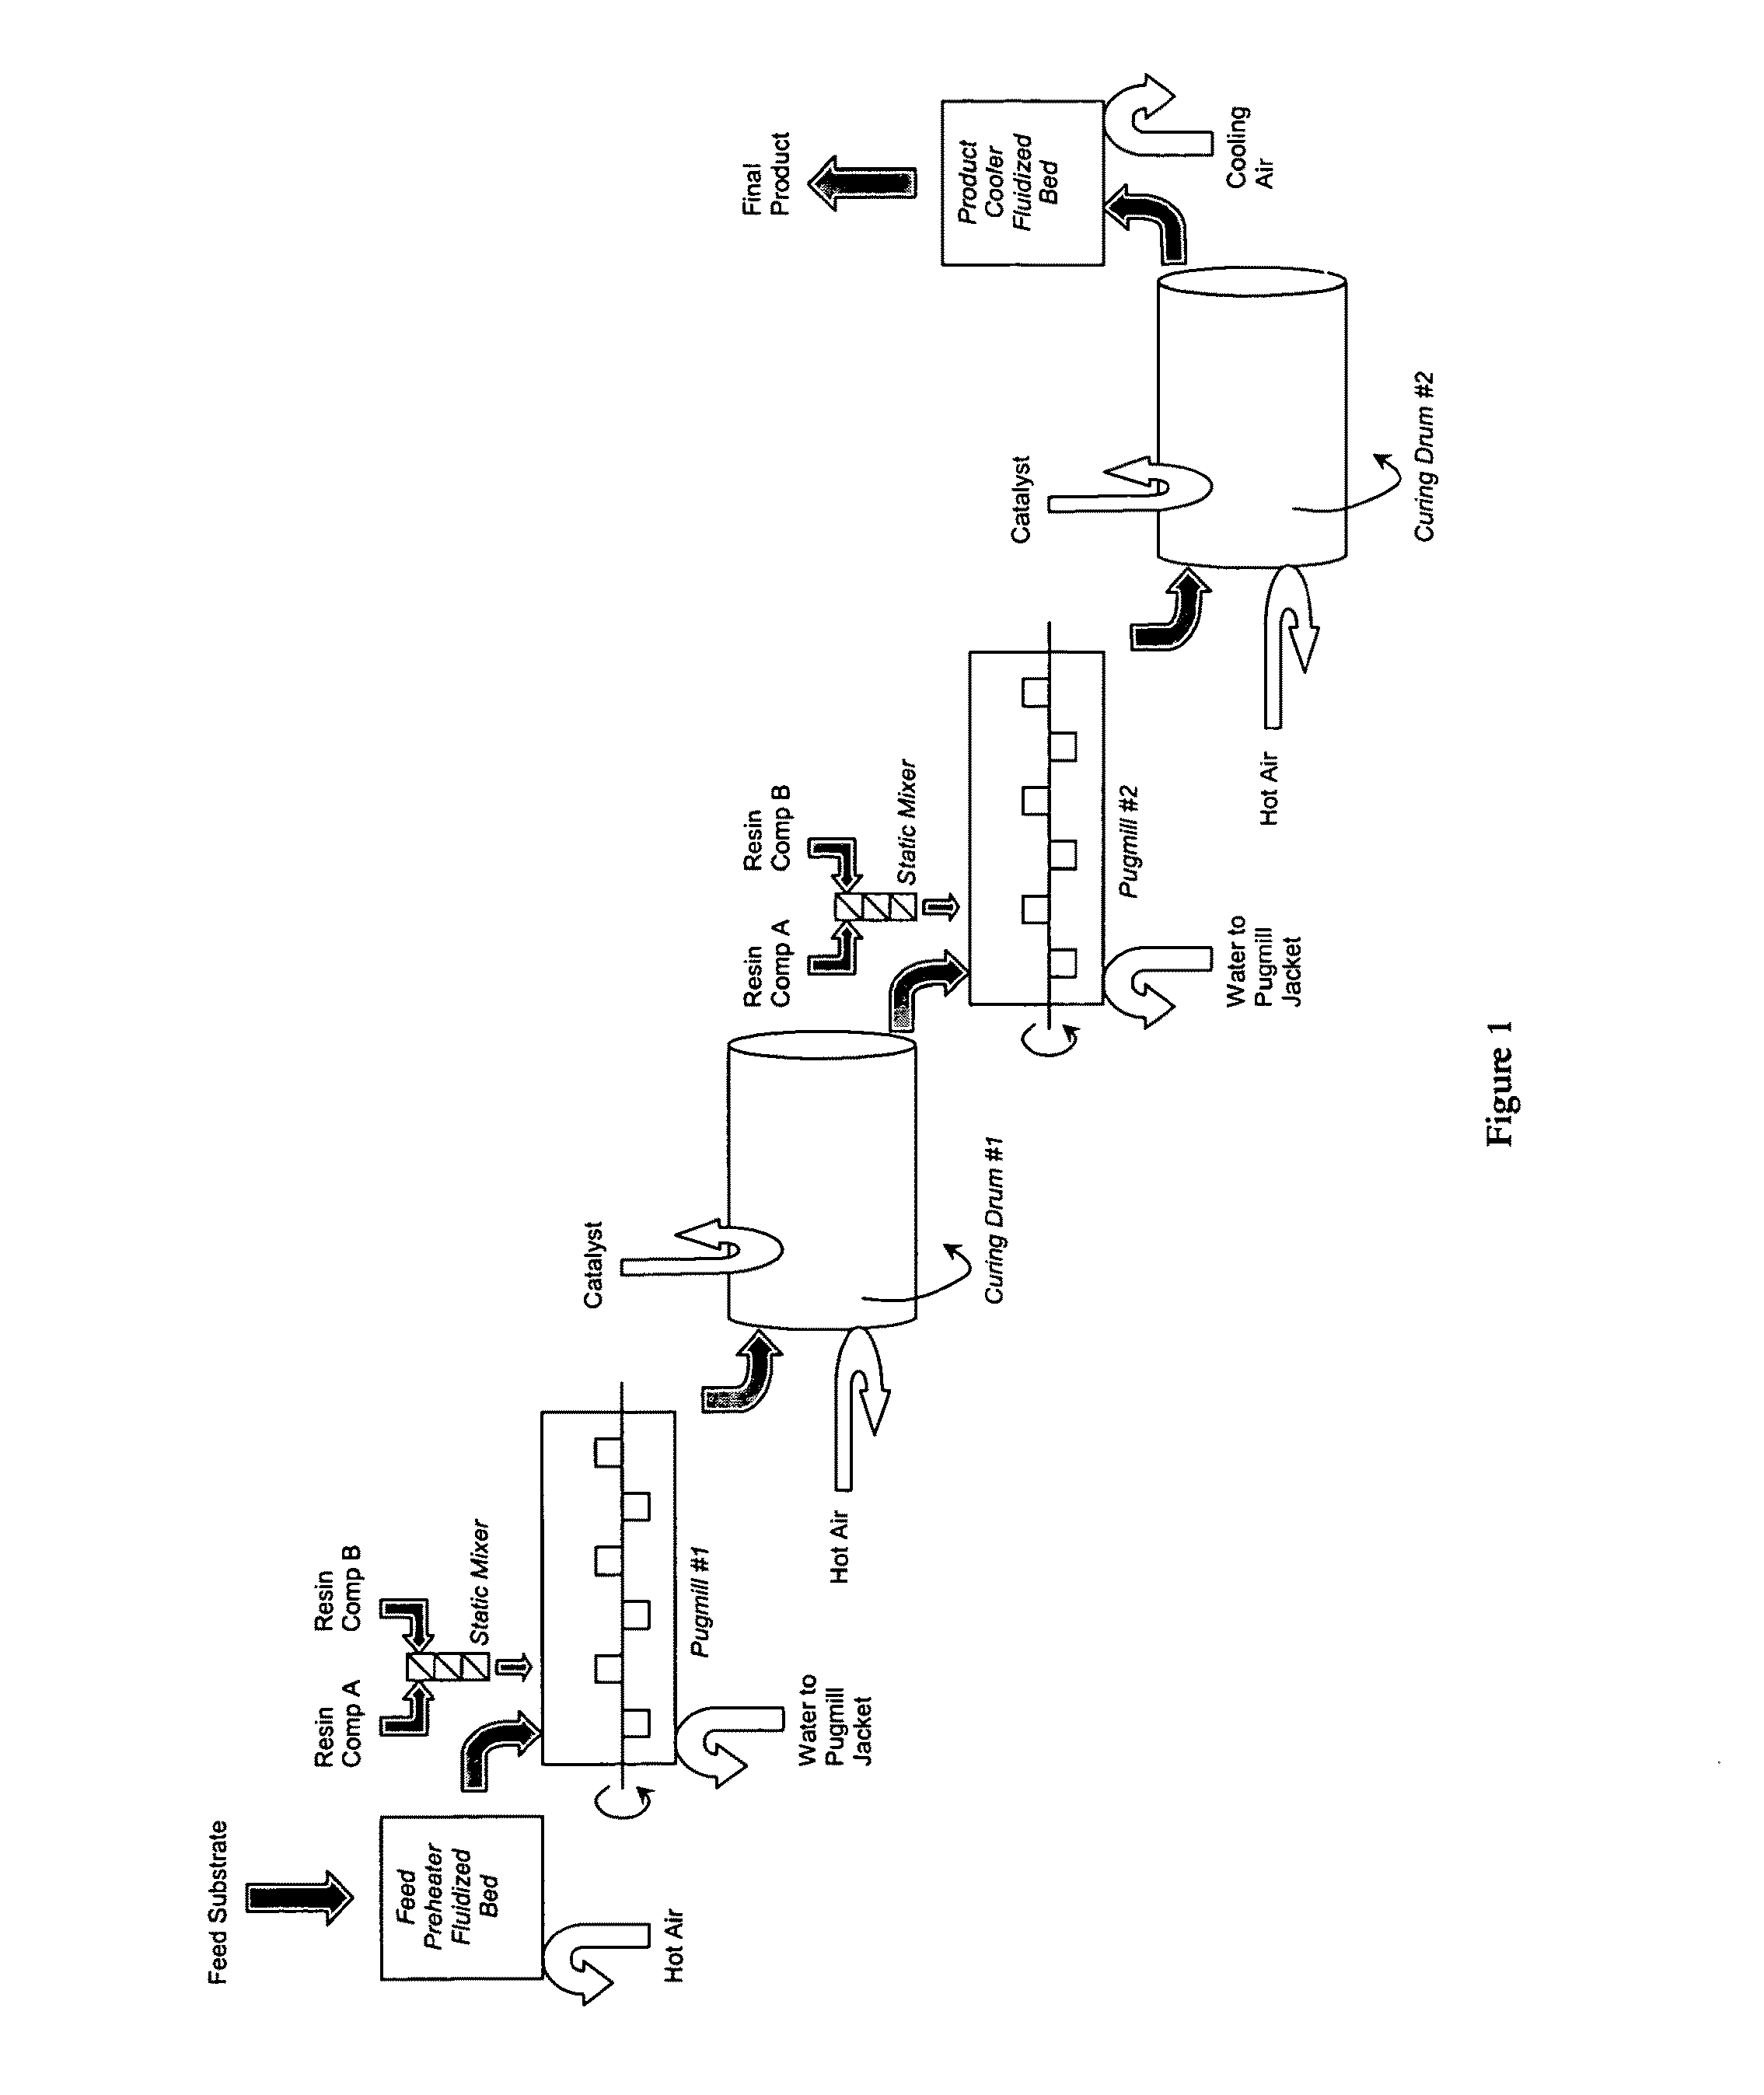 Methods and systems for coating granular substrates